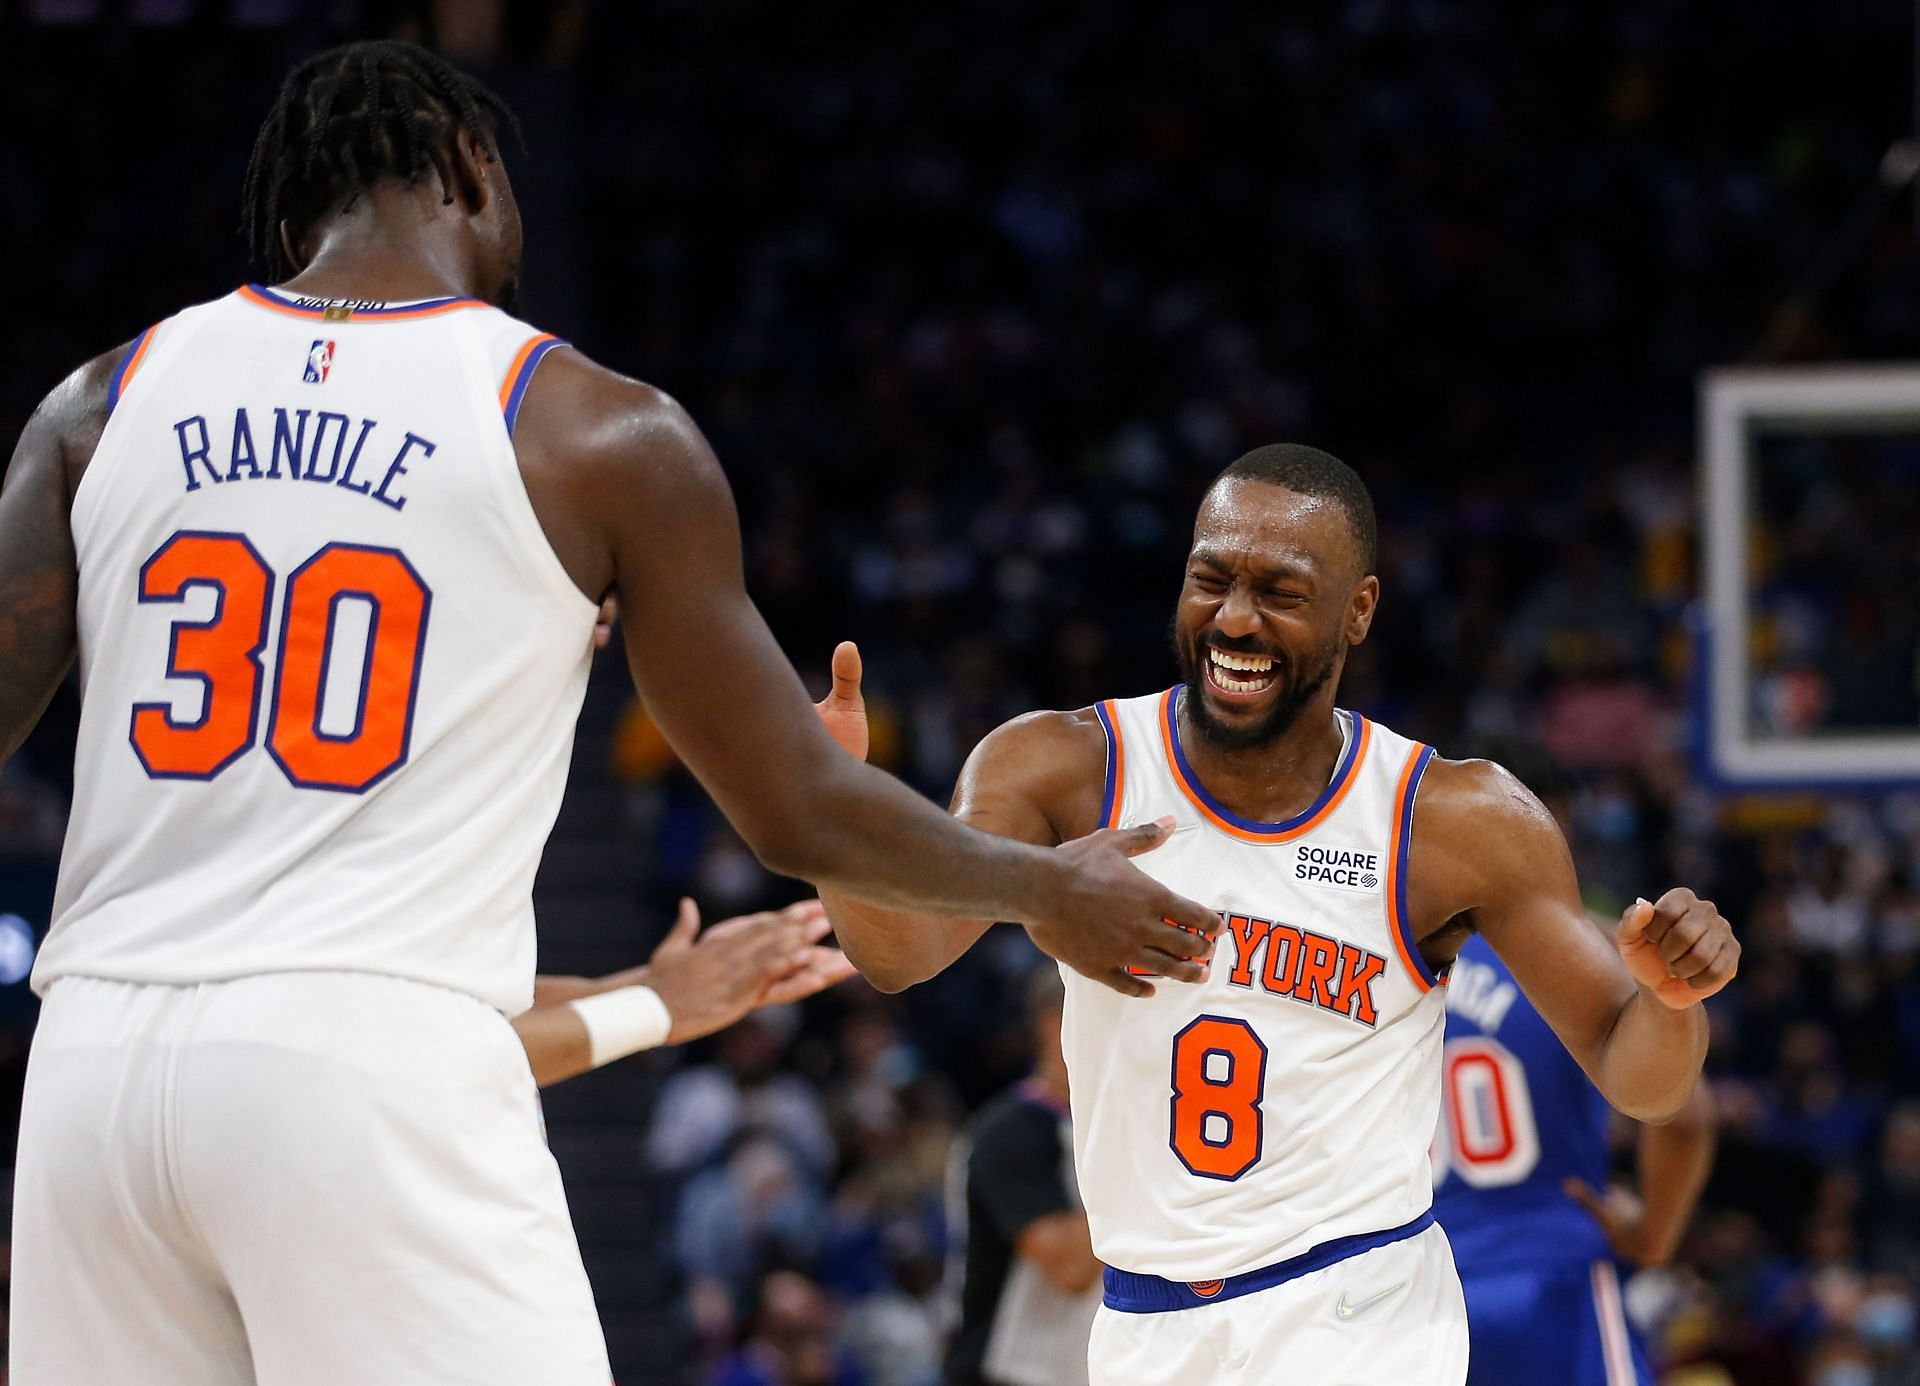 Kemba Walker (8) of the New York Knicks reacts with Julius Randle after a play against the Golden State Warriors in the third quarter Feb. 10 in San Francisco, California.